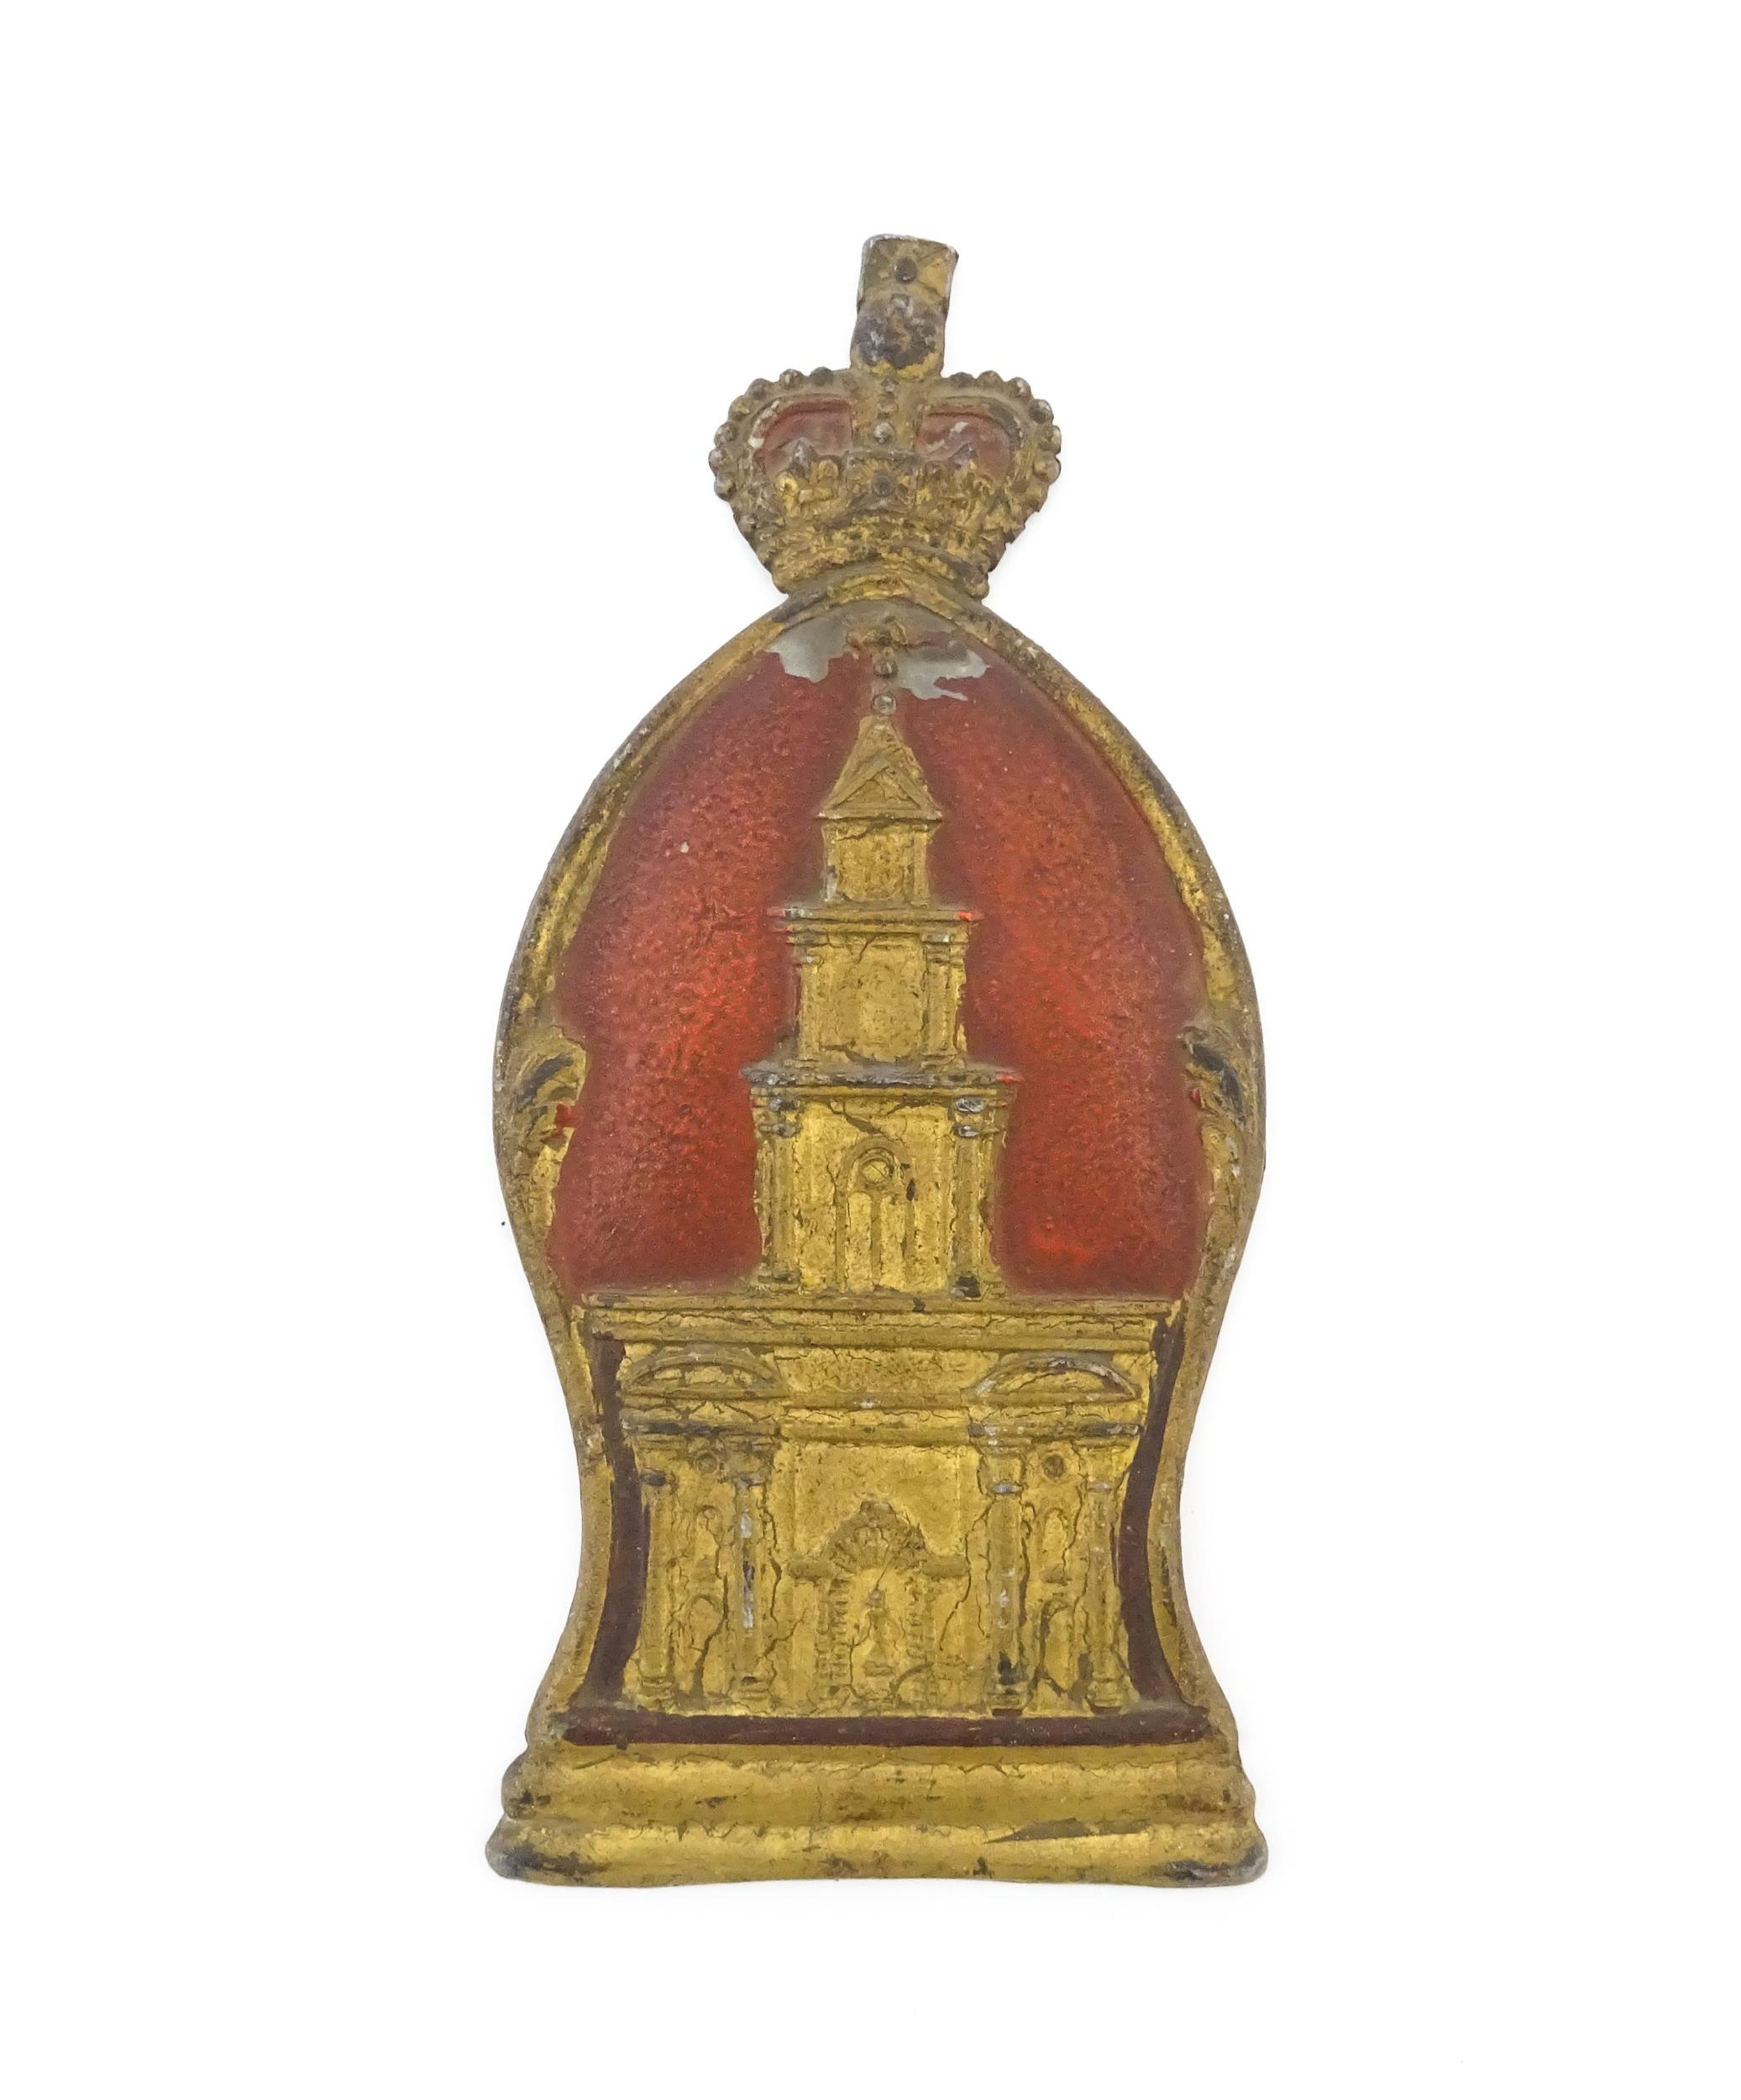 A 19thC lead fire mark for the Royal Exchange Assurance Company, London, with polychrome decoration.